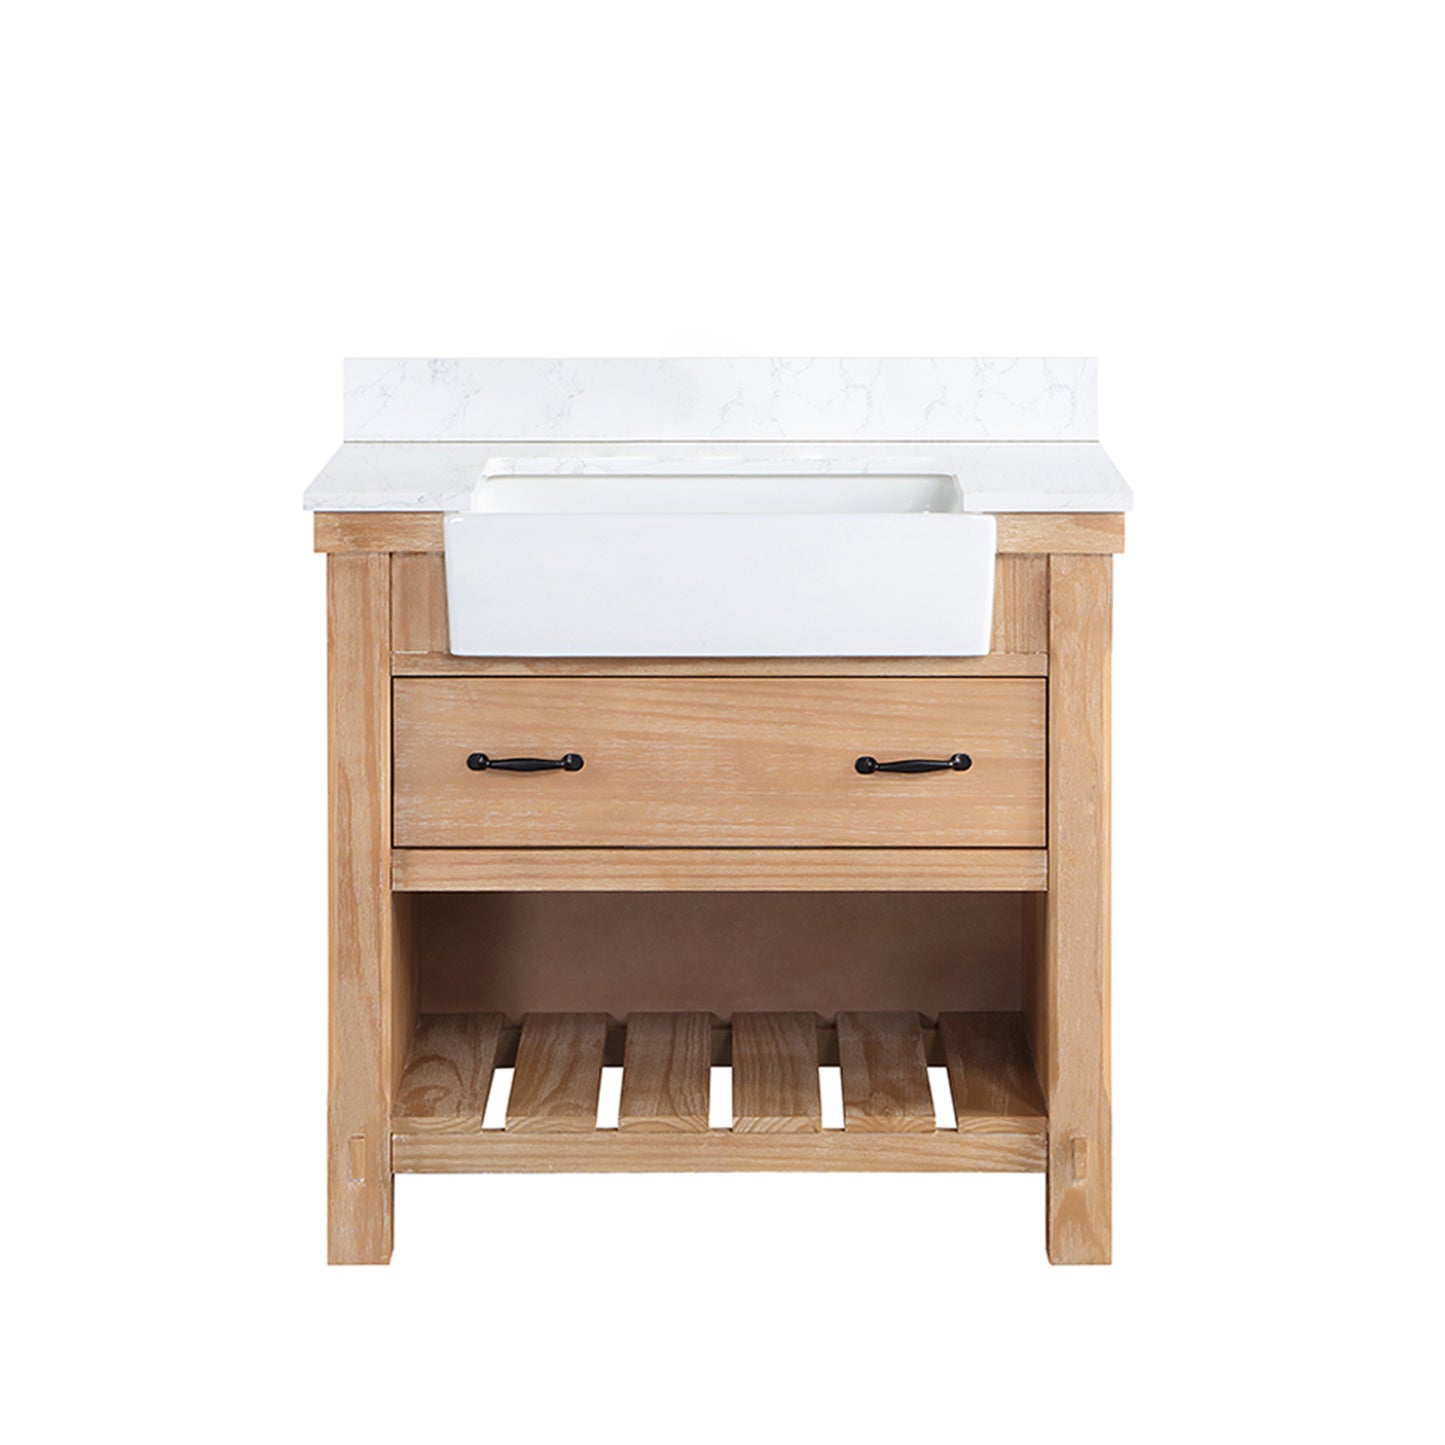 Villareal 36" Single Bath Vanity in Weathered Pine with Composite Stone Top in White, White Farmhouse Basin